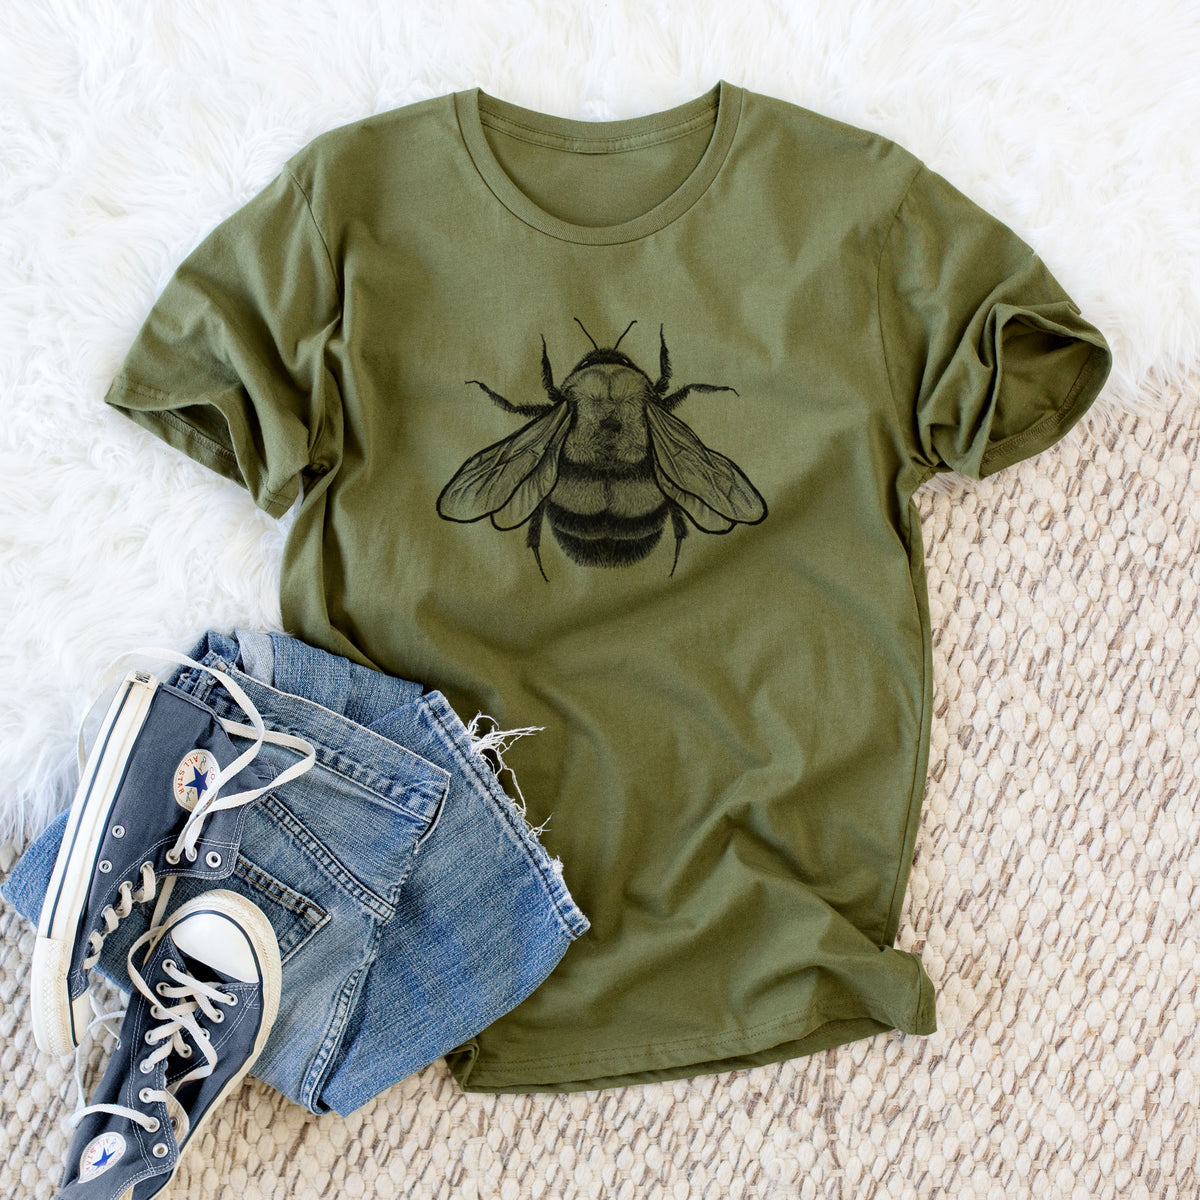 Bombus Affinis - Rusty-Patched Bumble Bee - Unisex Crewneck - Made in USA - 100% Organic Cotton